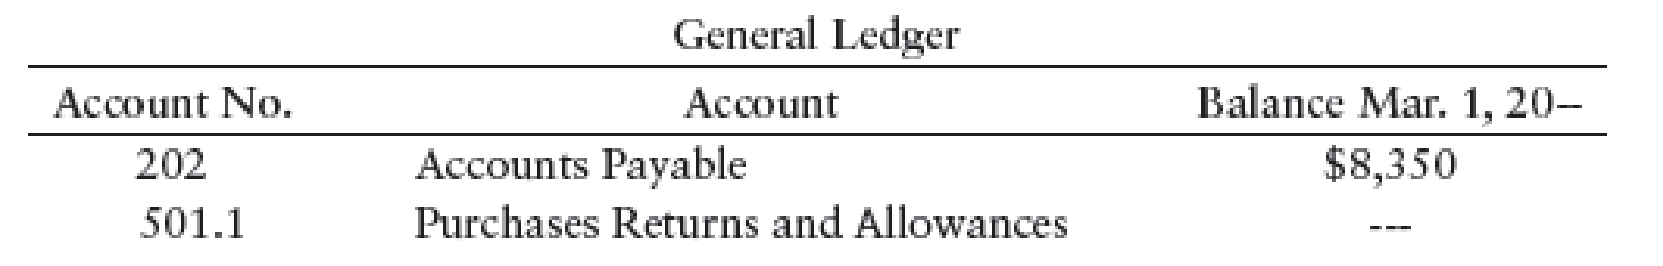 Chapter 11, Problem 6SEB, JOURNALIZING PURCHASES RETURNS AND ALLOWANCES AND POSTING TO GENERAL LEDGER AND ACCOUNTS PAYABLE , example  1